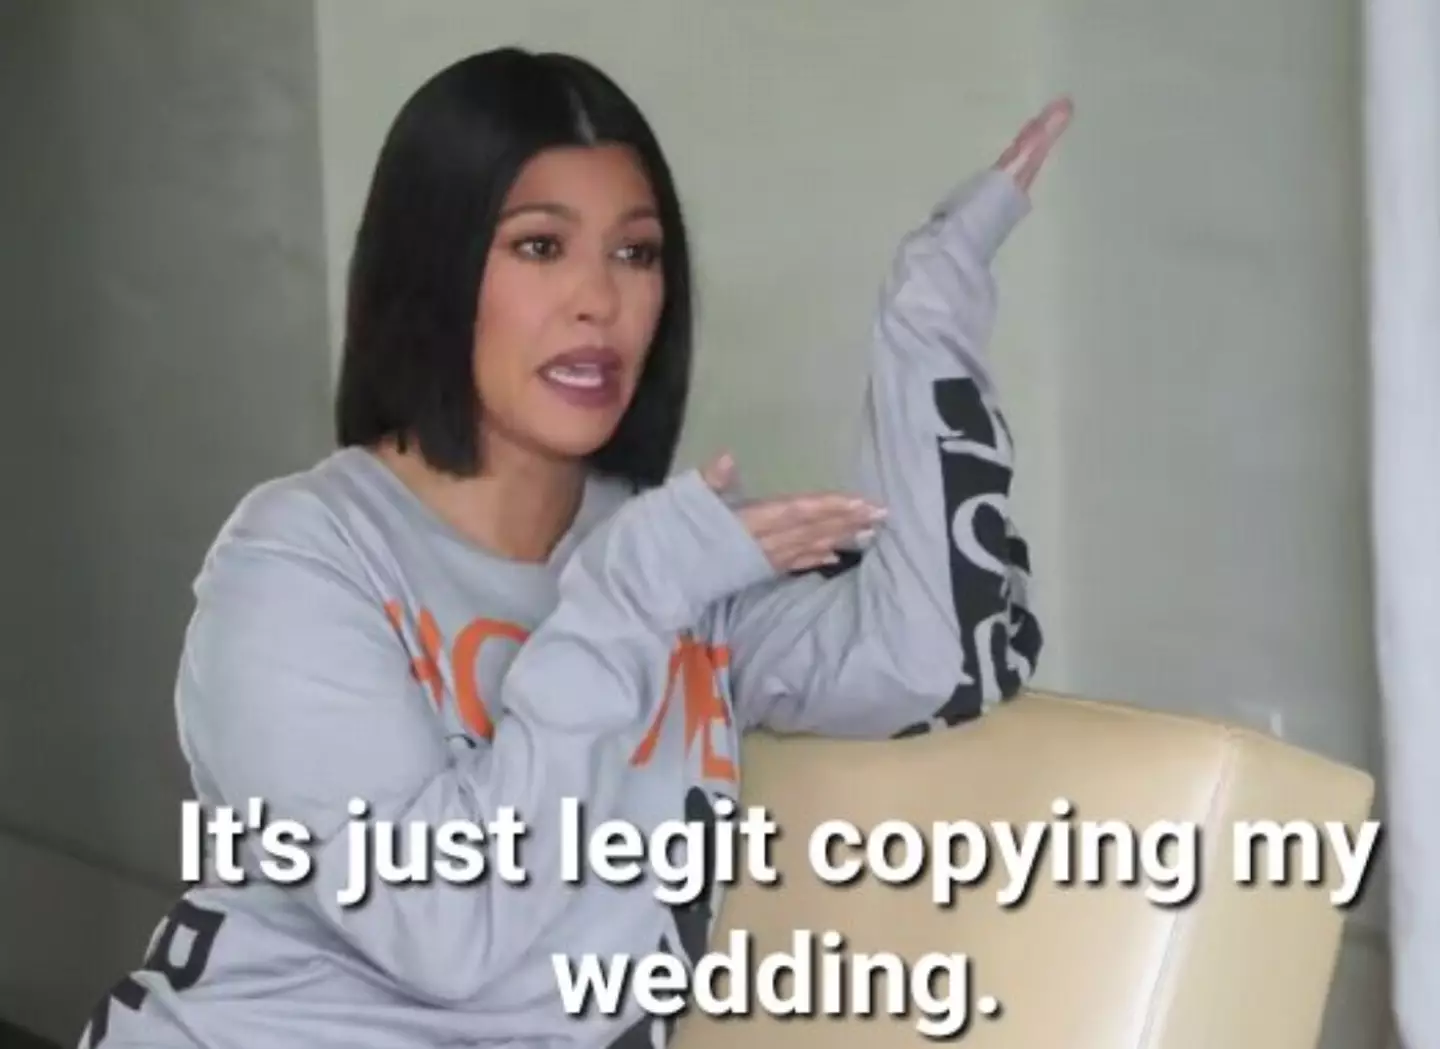 Kourtney became emotional over the whole debacle in the latest episode of The Kardashians.